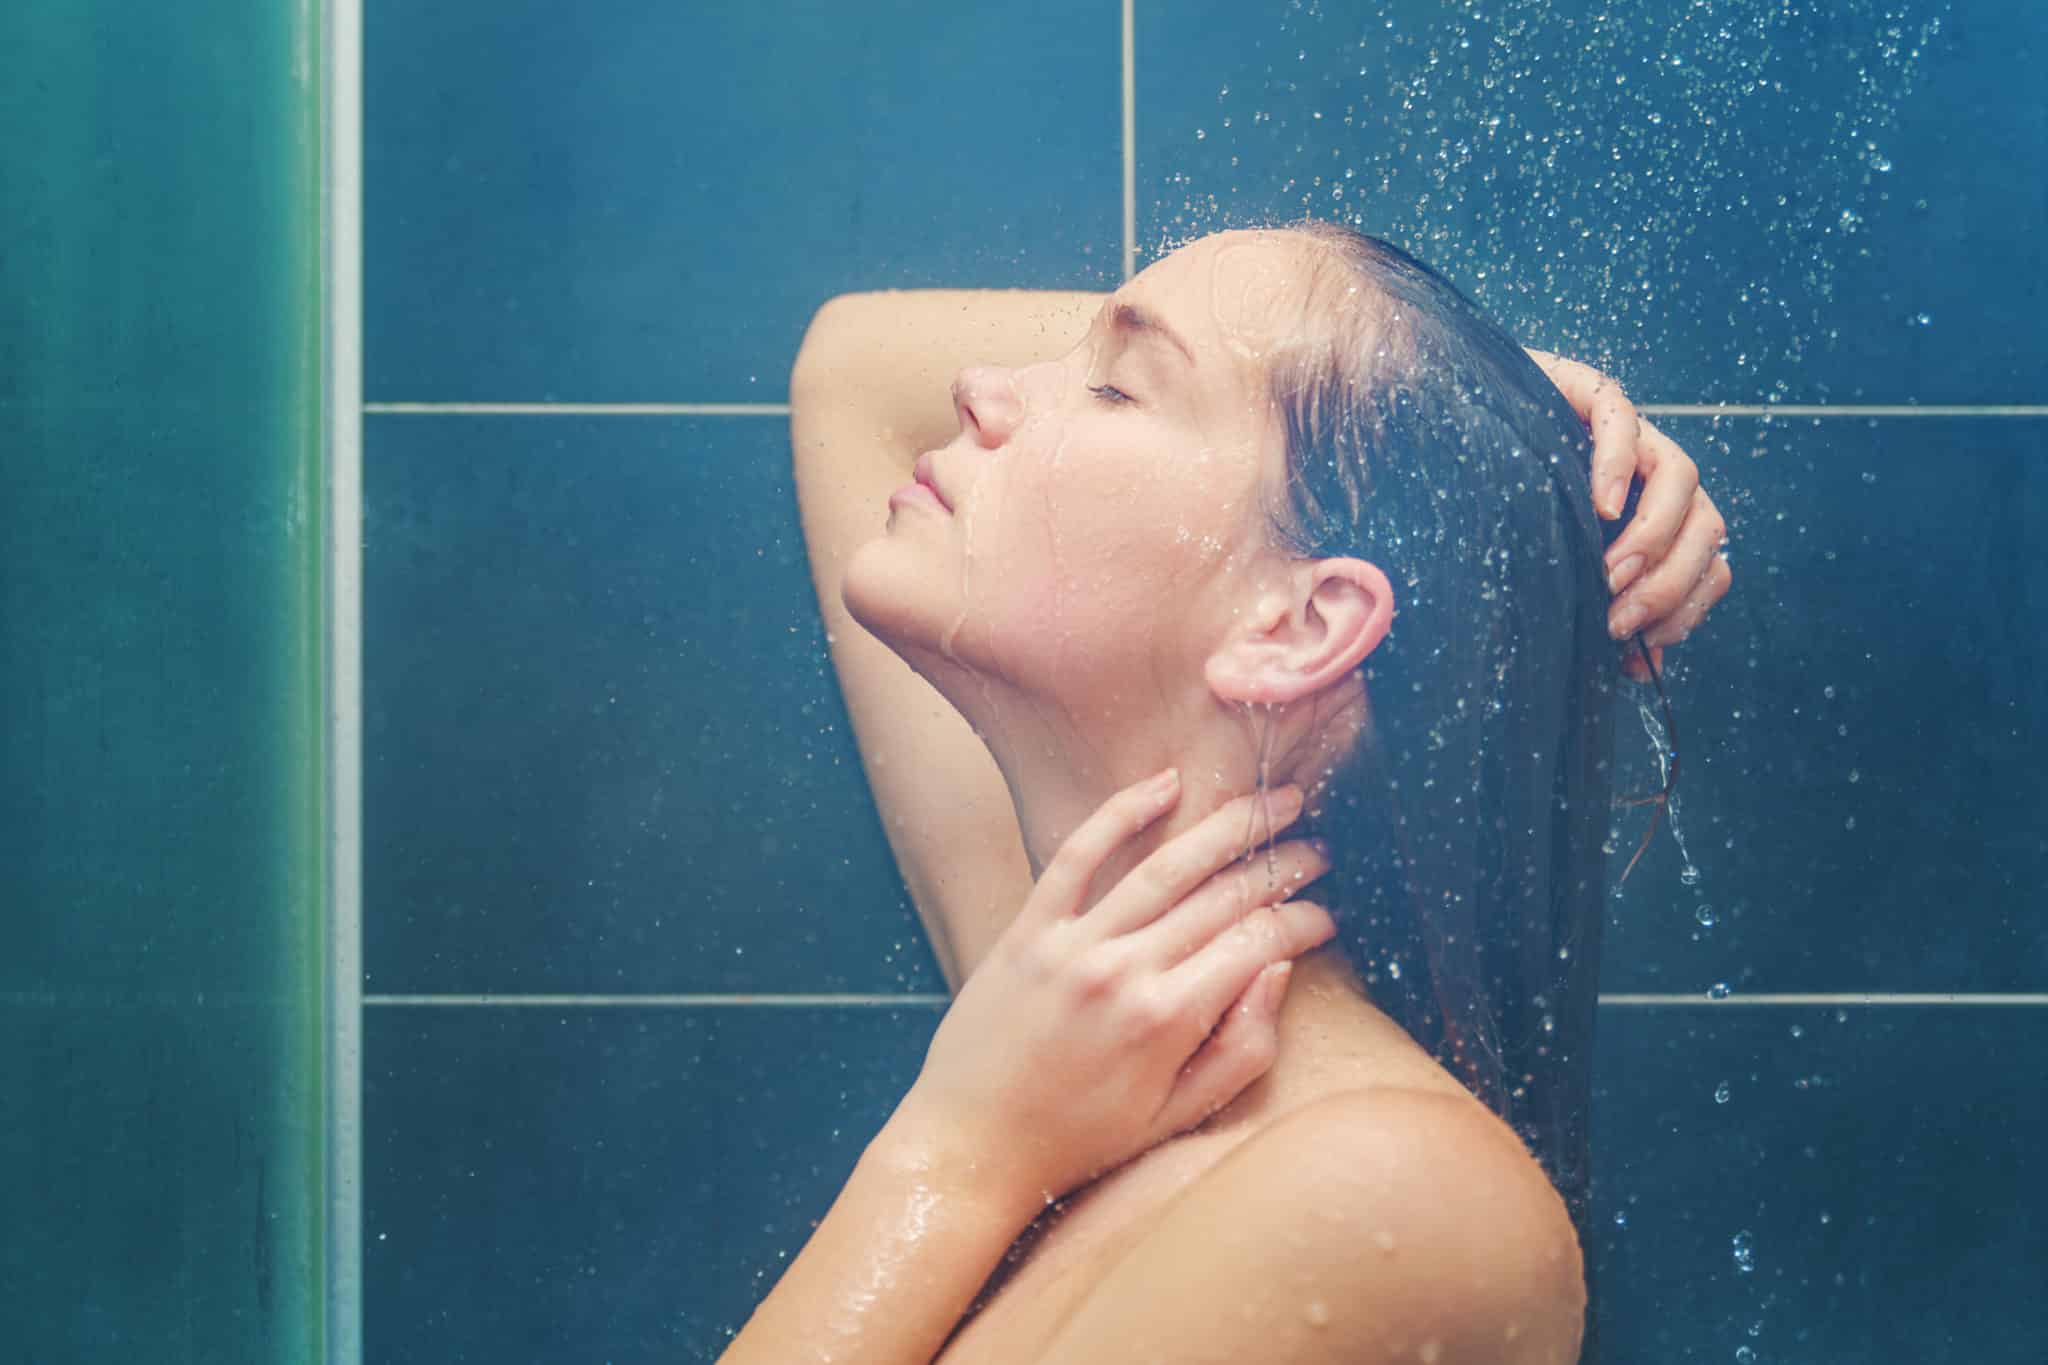 Nighttime showers can help allergy sufferers.